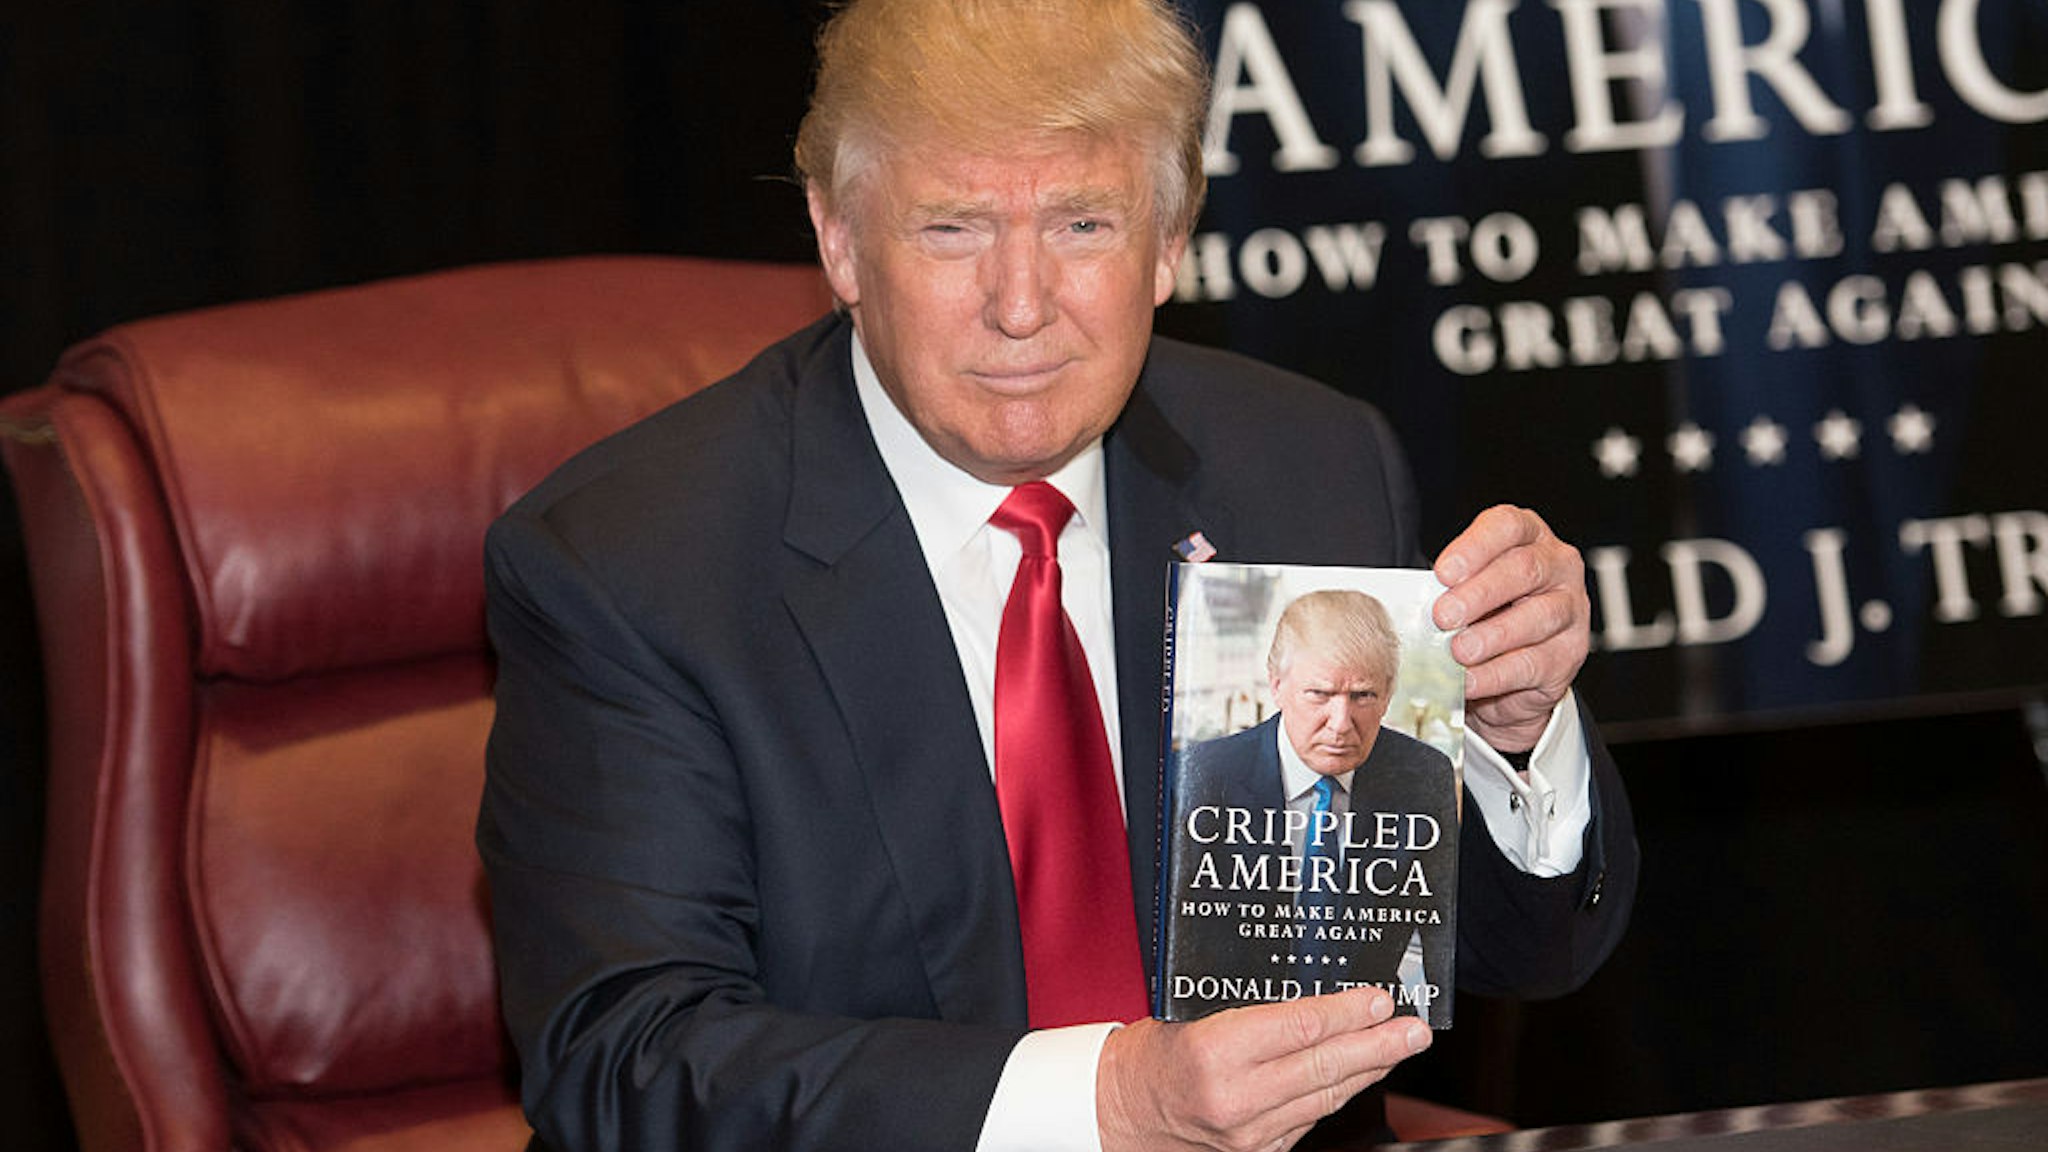 Donald Trump attends a book signing of his new book "Crippled America" at Trump Tower on November 3, 2015 in New York City.